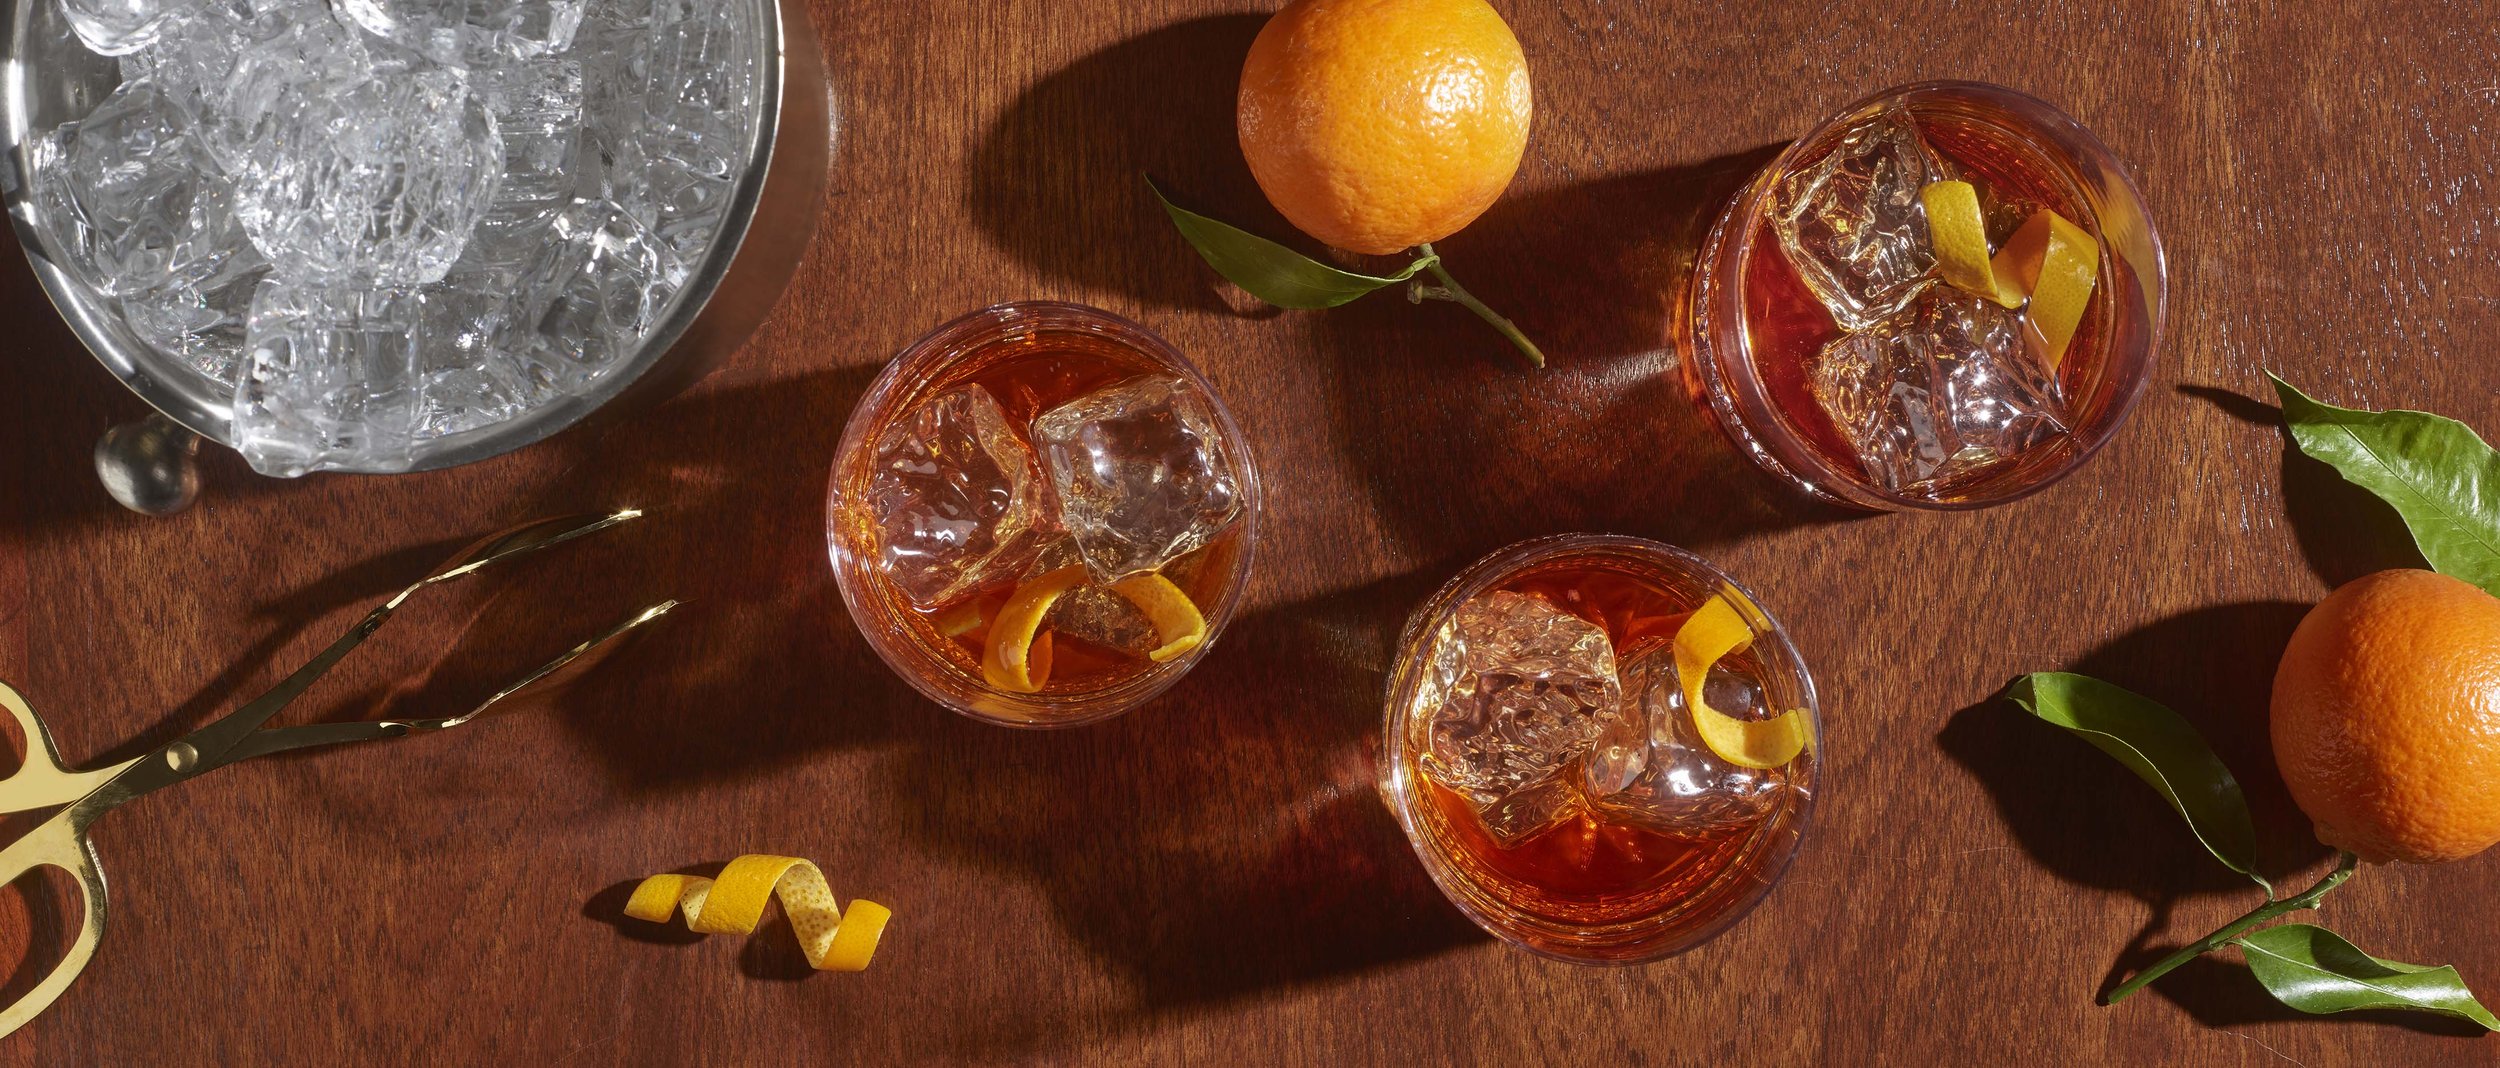 Phase3_Sipsmith Negroni_Tablescape_4273B9636.jpg